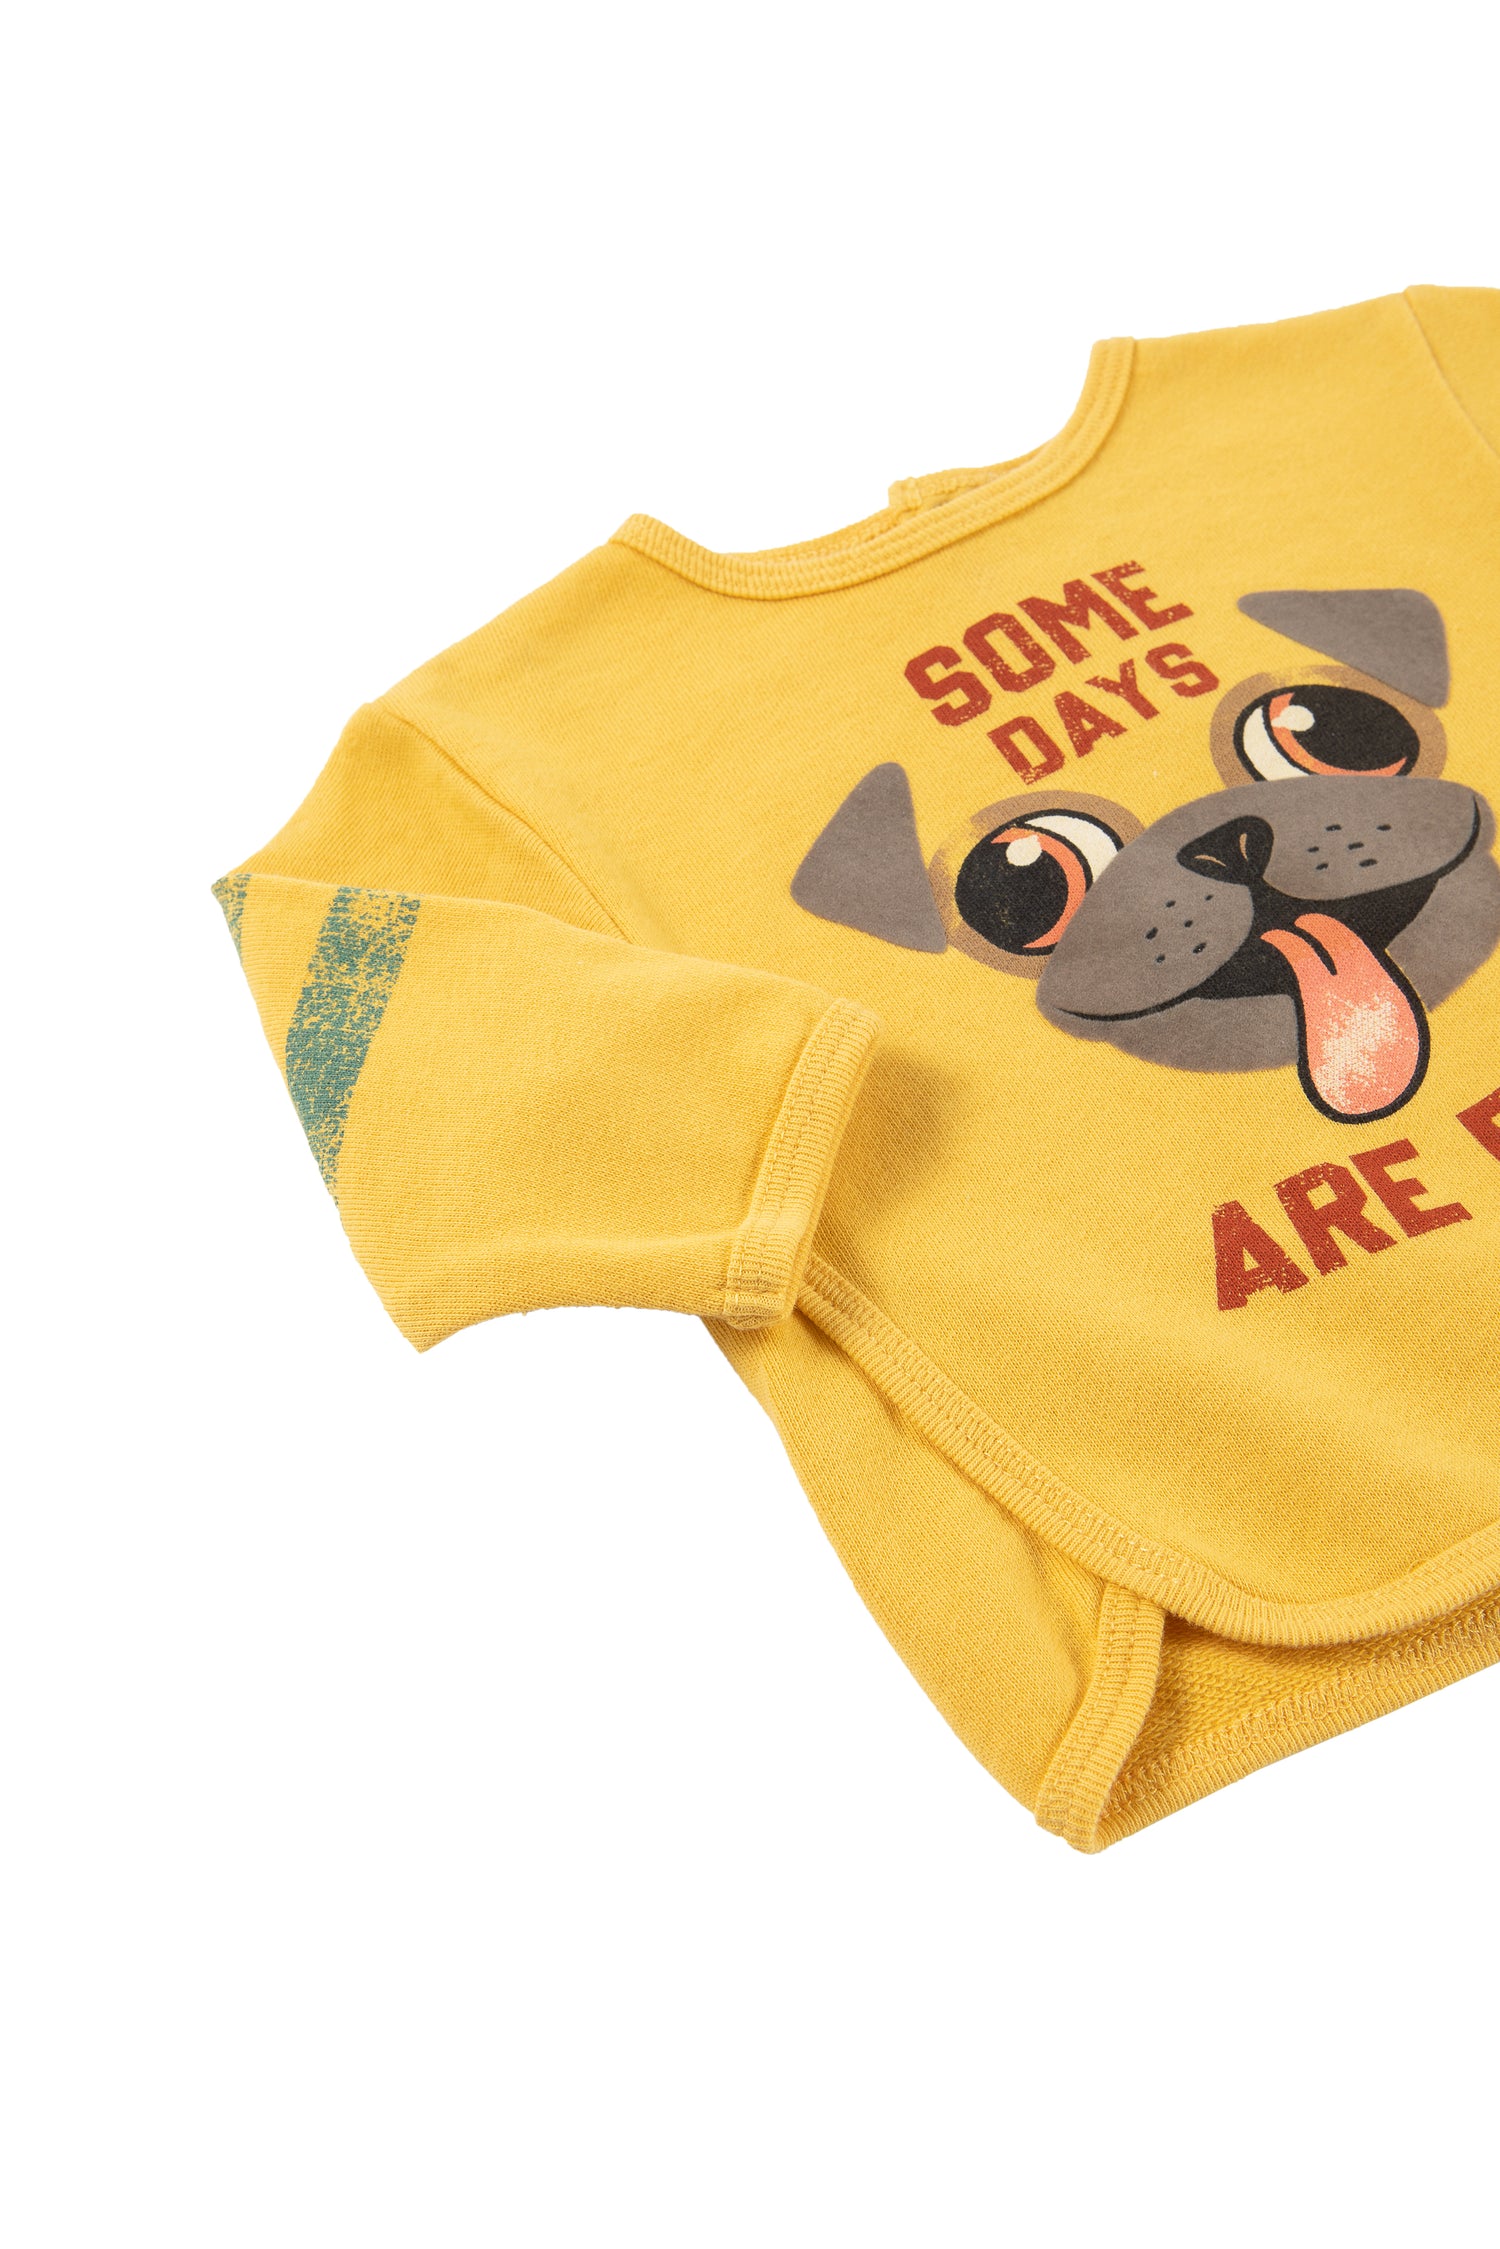 Close up view of yellow and green shirt with "some days are ruff" wording 